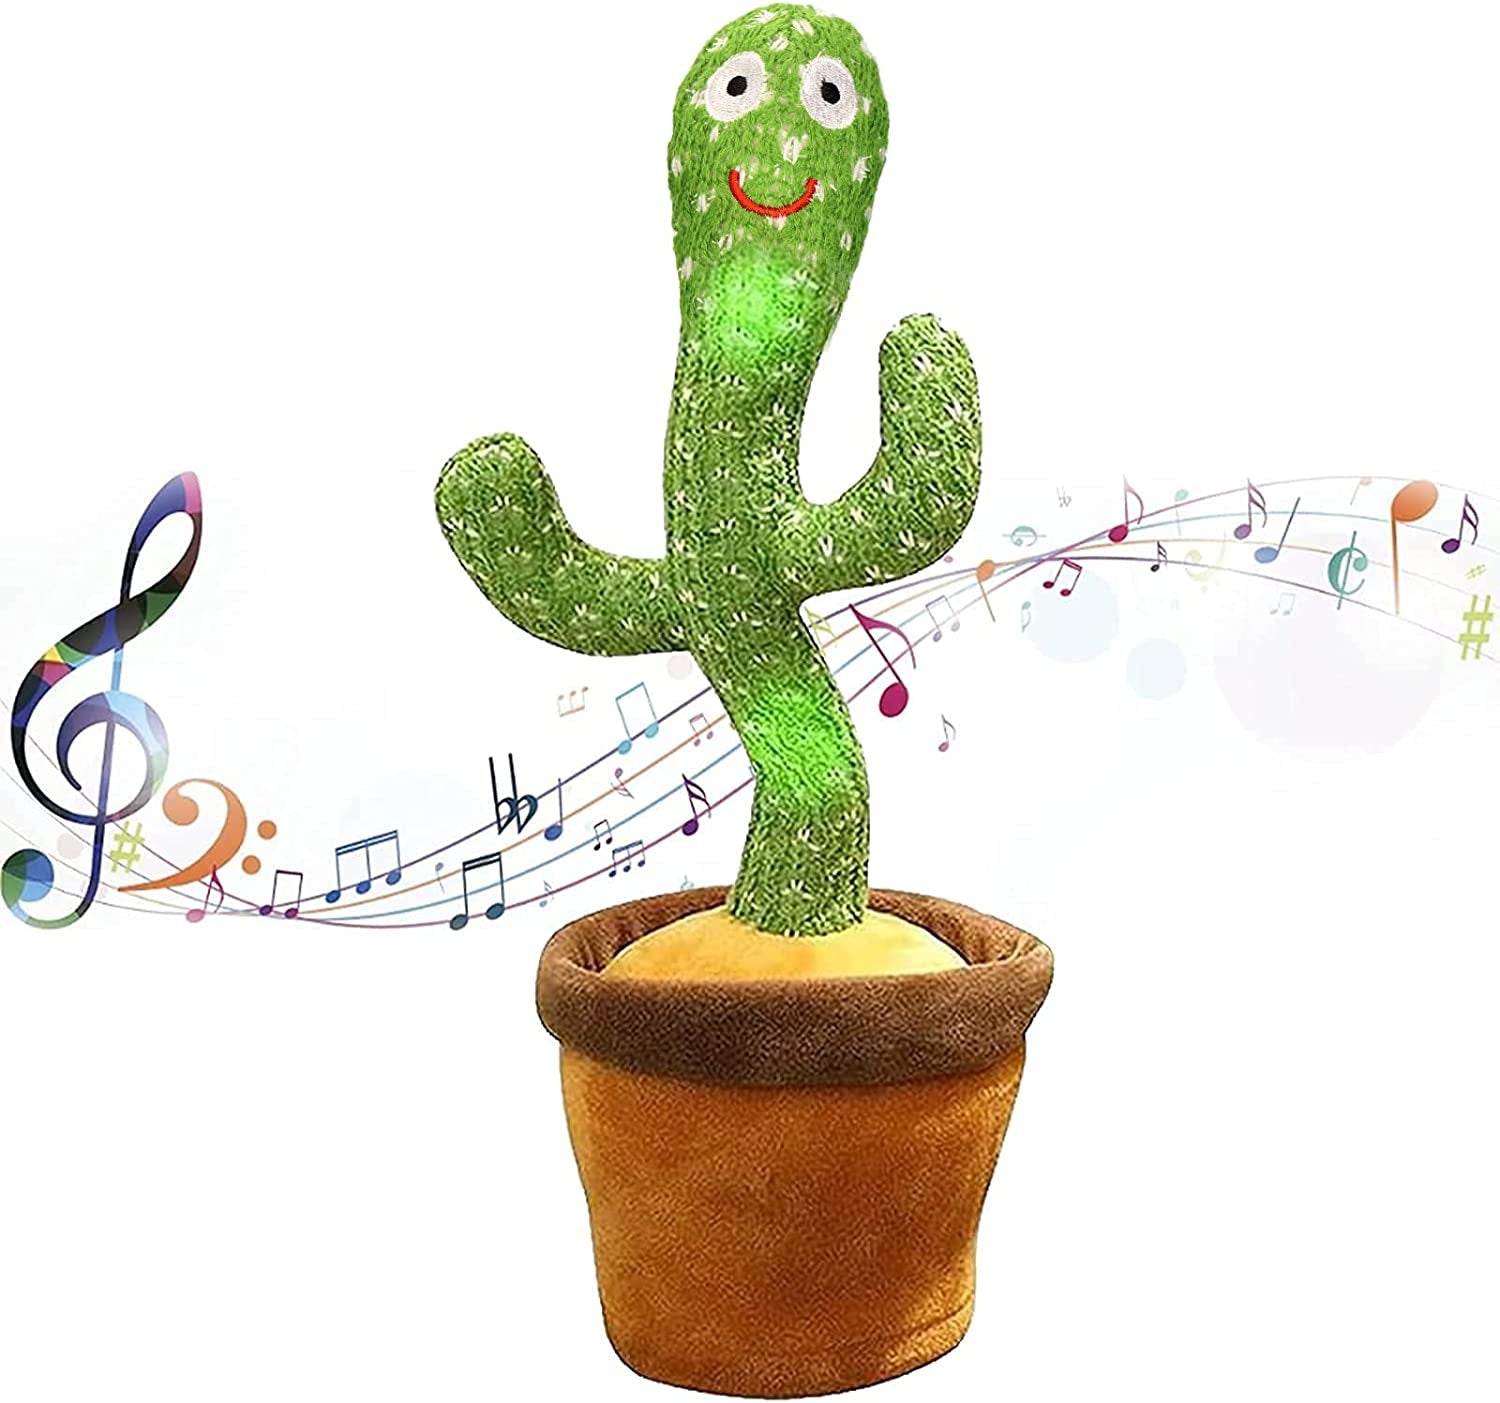 Dancing Cactus Toy Repeat What You Say, Talking Cactus Toy Singing Cactus Mimic Toy Baby Toys for Year Old Boys Girls Kids Gifts, Baby Encourage Speech Toys